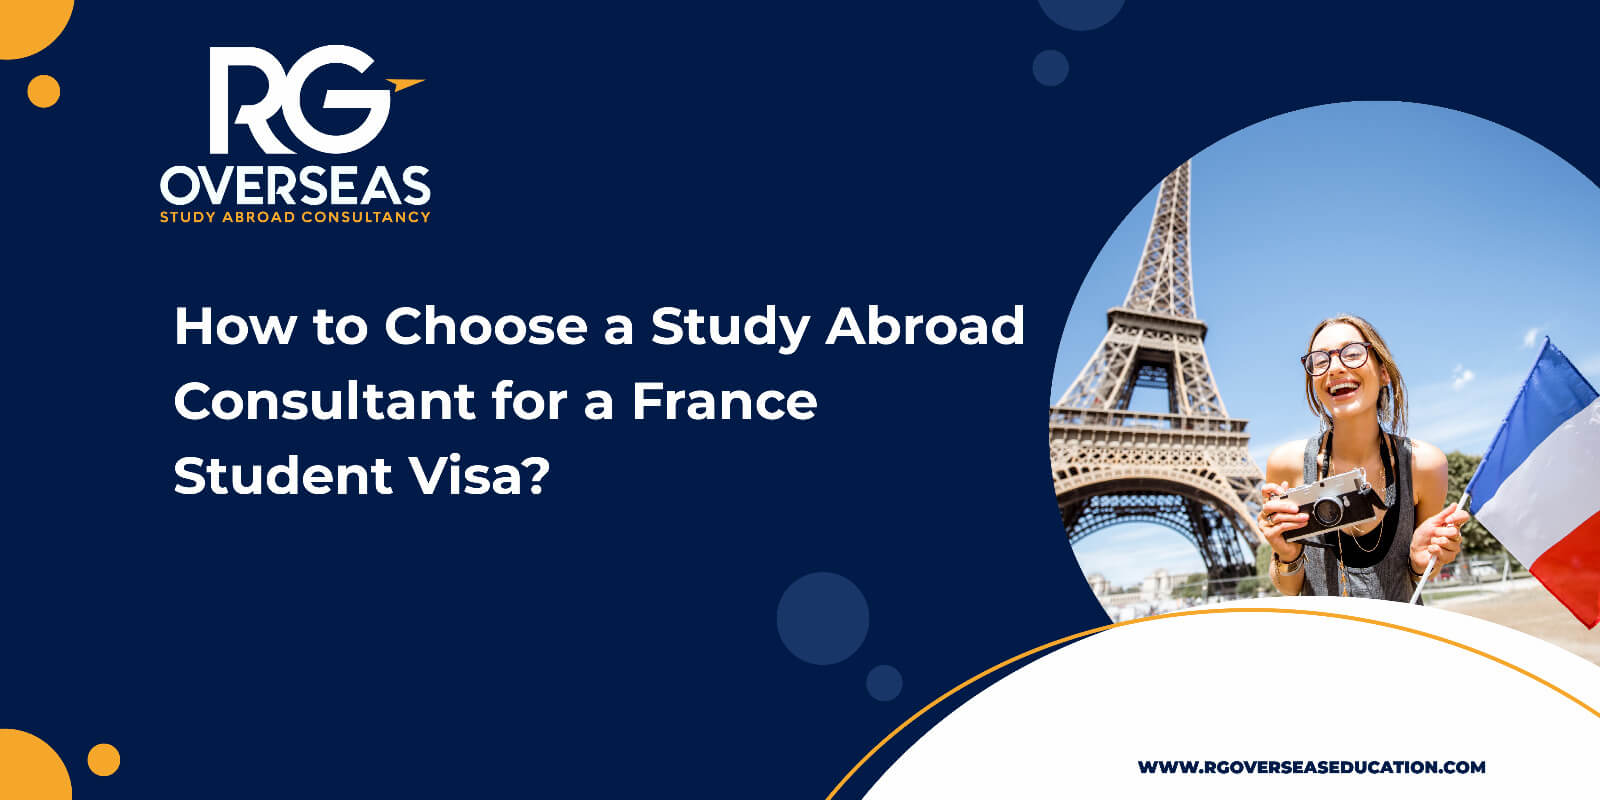 How to Choose Study Abroad Consultant for France Student Visa?